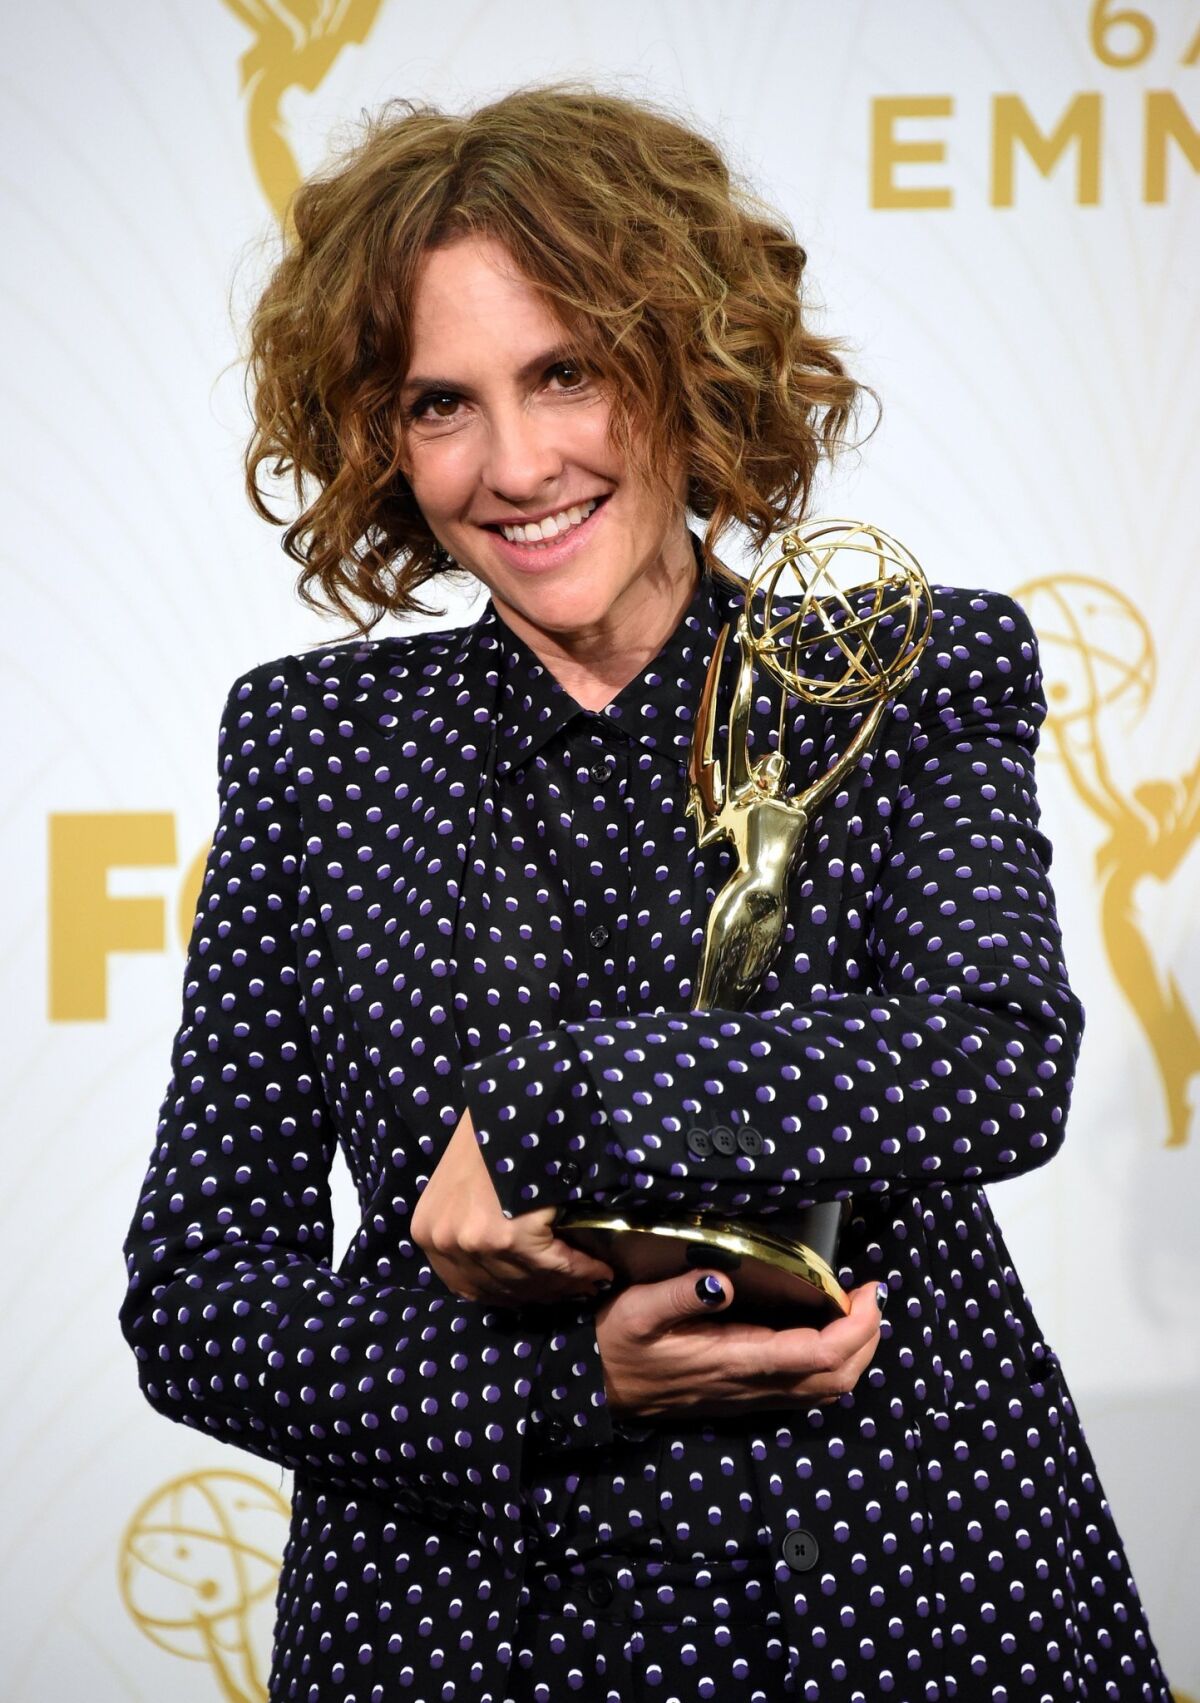 LOS ANGELES, CA - SEPTEMBER 20: Writer-director Jill Soloway, winner of Outstanding Directing for a Comedy Series for "Transparent", poses in the press room at the 67th Annual Primetime Emmy Awards at Microsoft Theater on September 20, 2015 in Los Angeles, California. (Photo by Jason Merritt/Getty Images) ** OUTS - ELSENT, FPG - OUTS * NM, PH, VA if sourced by CT, LA or MoD **